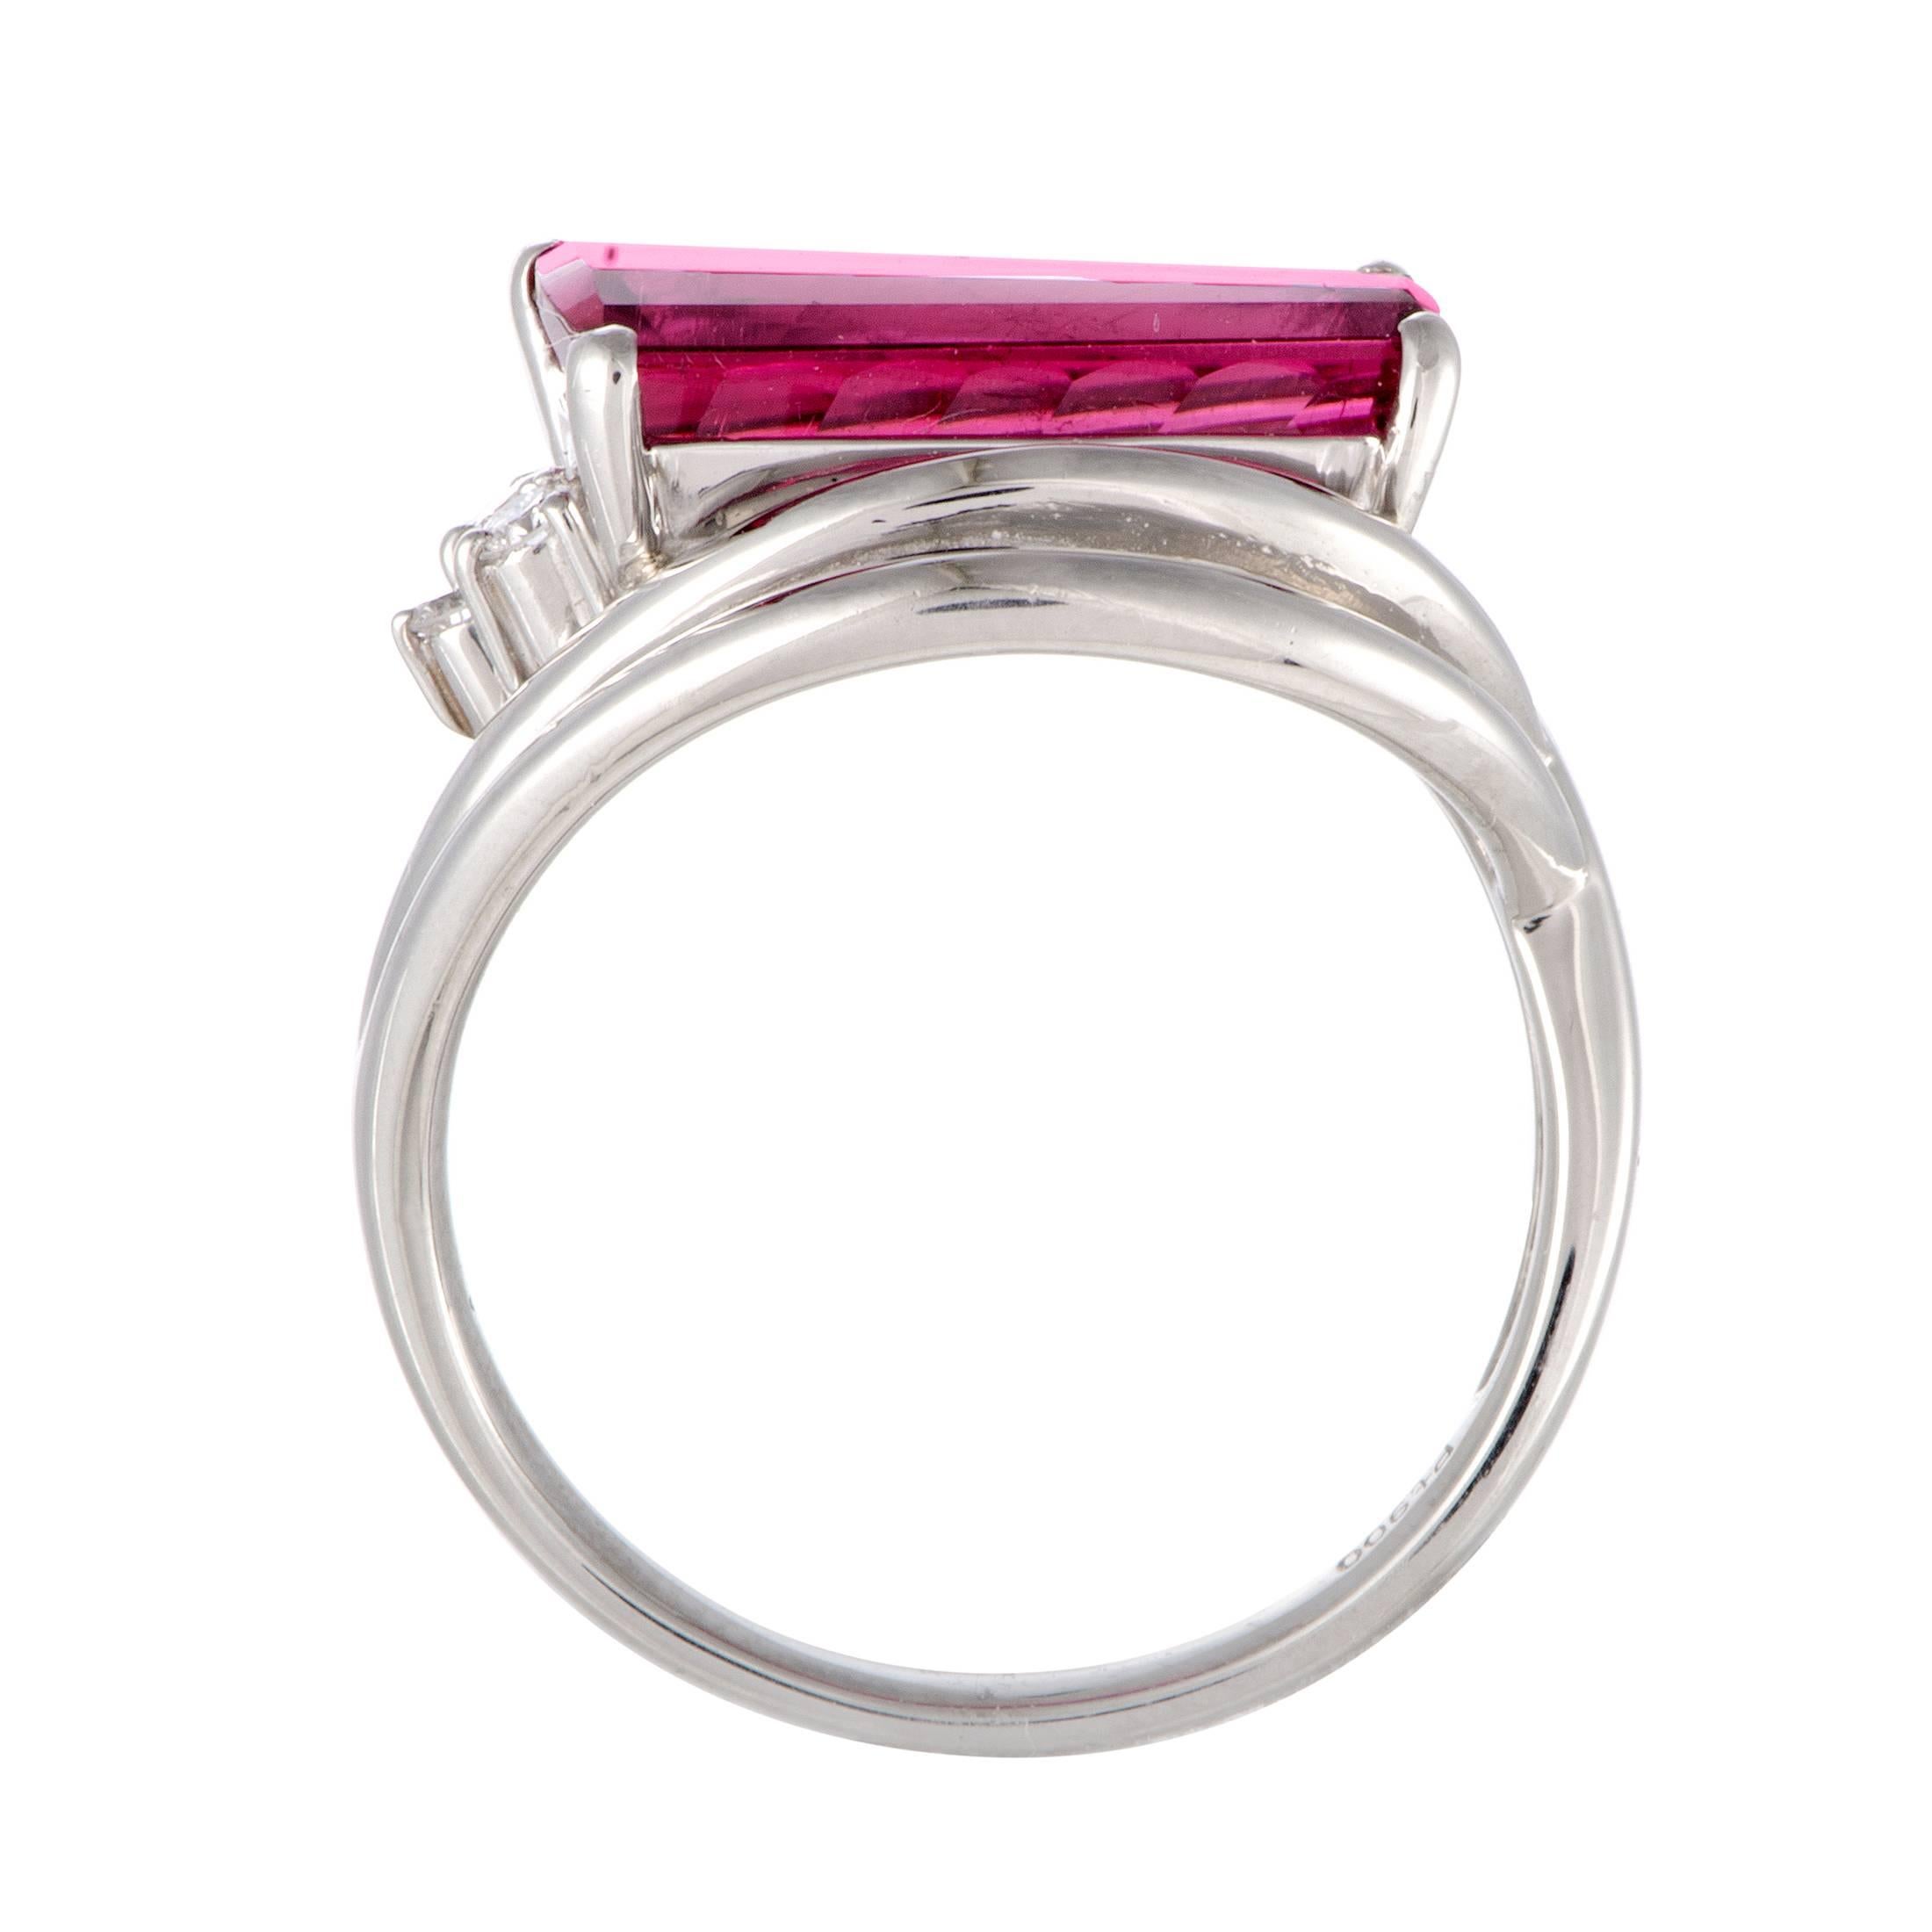 The striking pink tourmaline takes the central place in this superb ring made of prestigious platinum that boasts an endearingly fashionable appeal. The tourmaline weighs 4.40 carats and the ring is also set with diamond stones that total 0.16